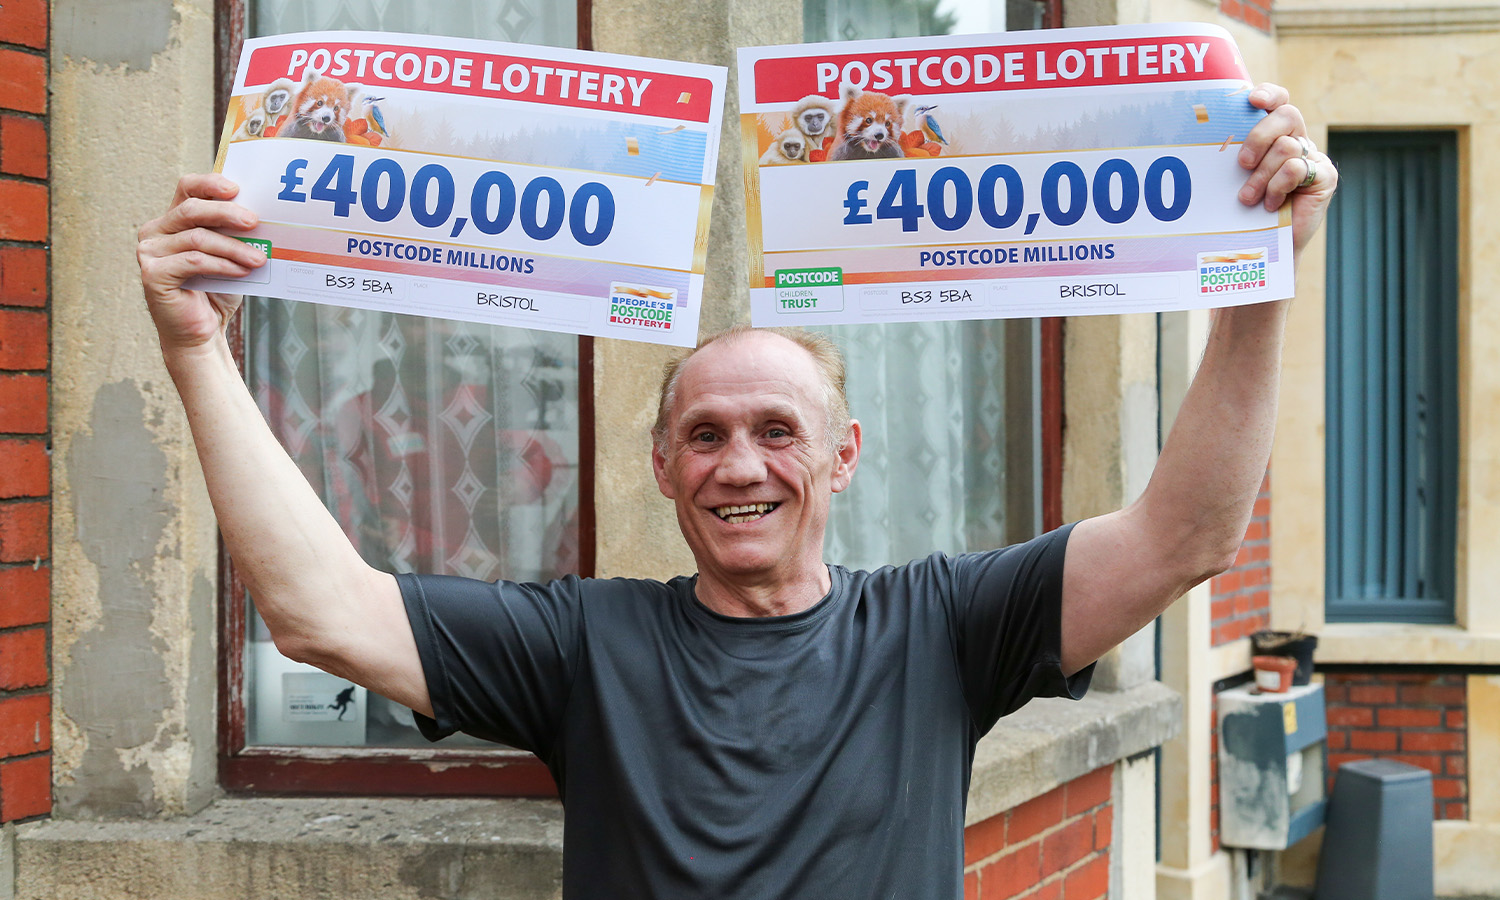 Tony was delighted to double his prize to £800,000 thanks to playing with two tickets